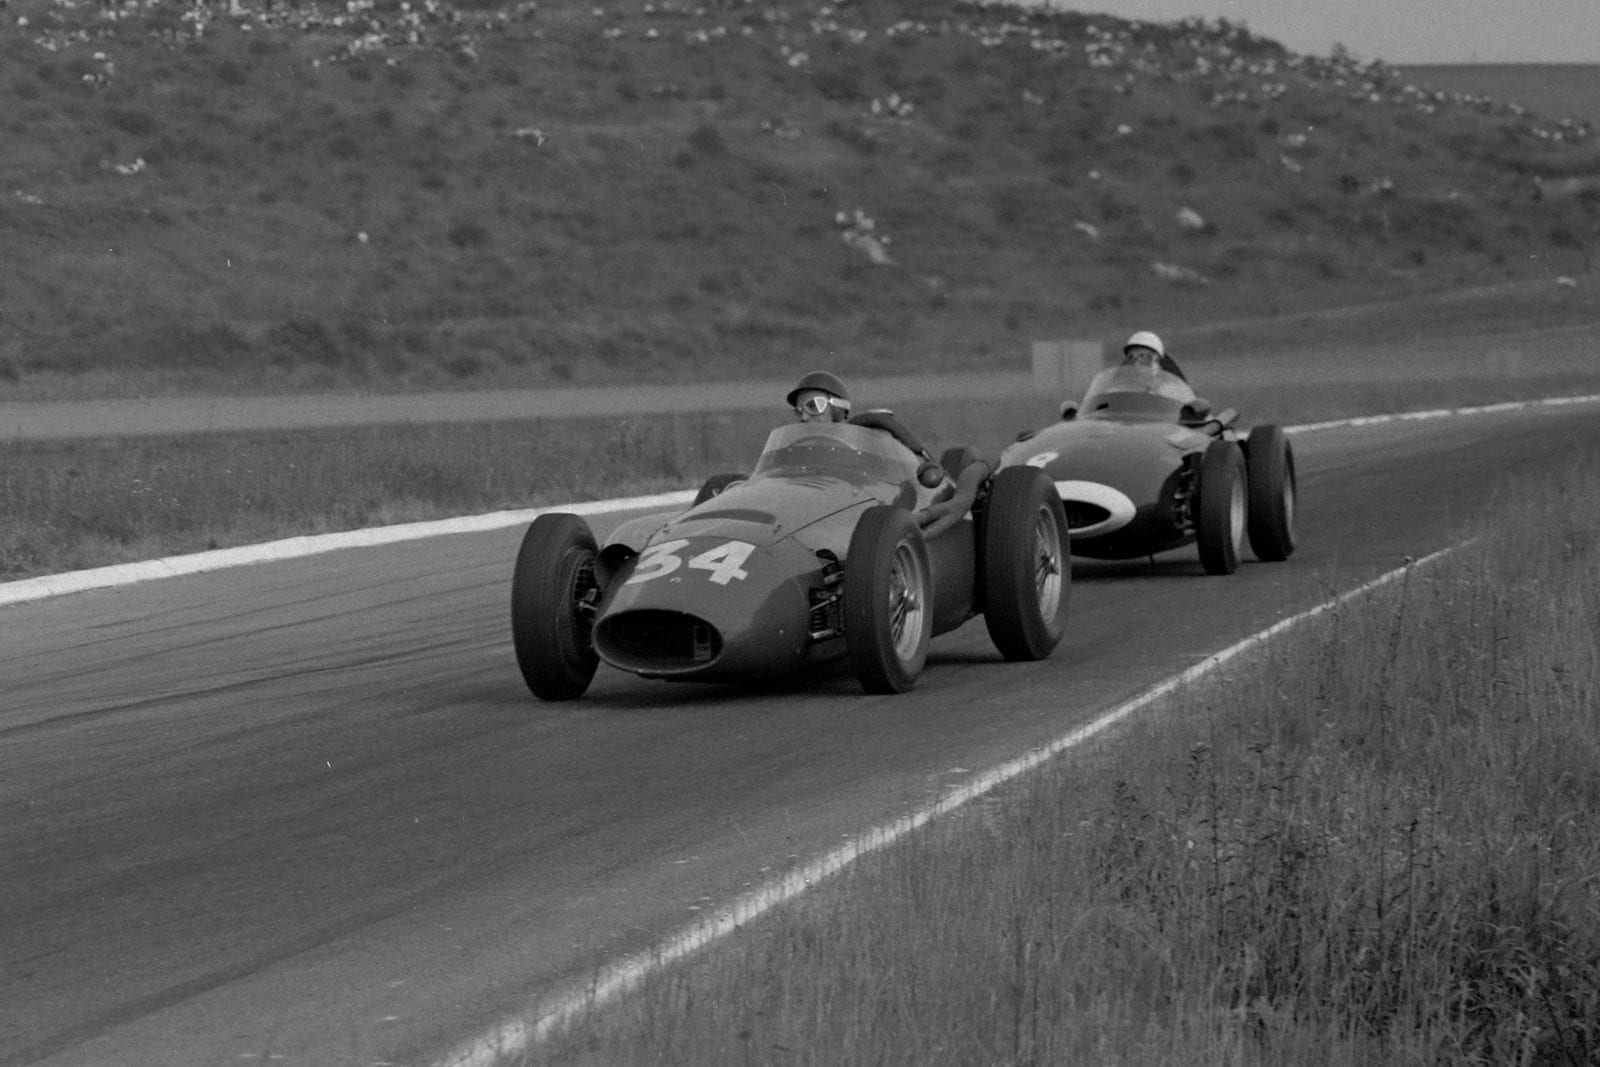 Juan Manuel Fangio in his Maserati 250F leads Stirling Moss in his Vanwall.